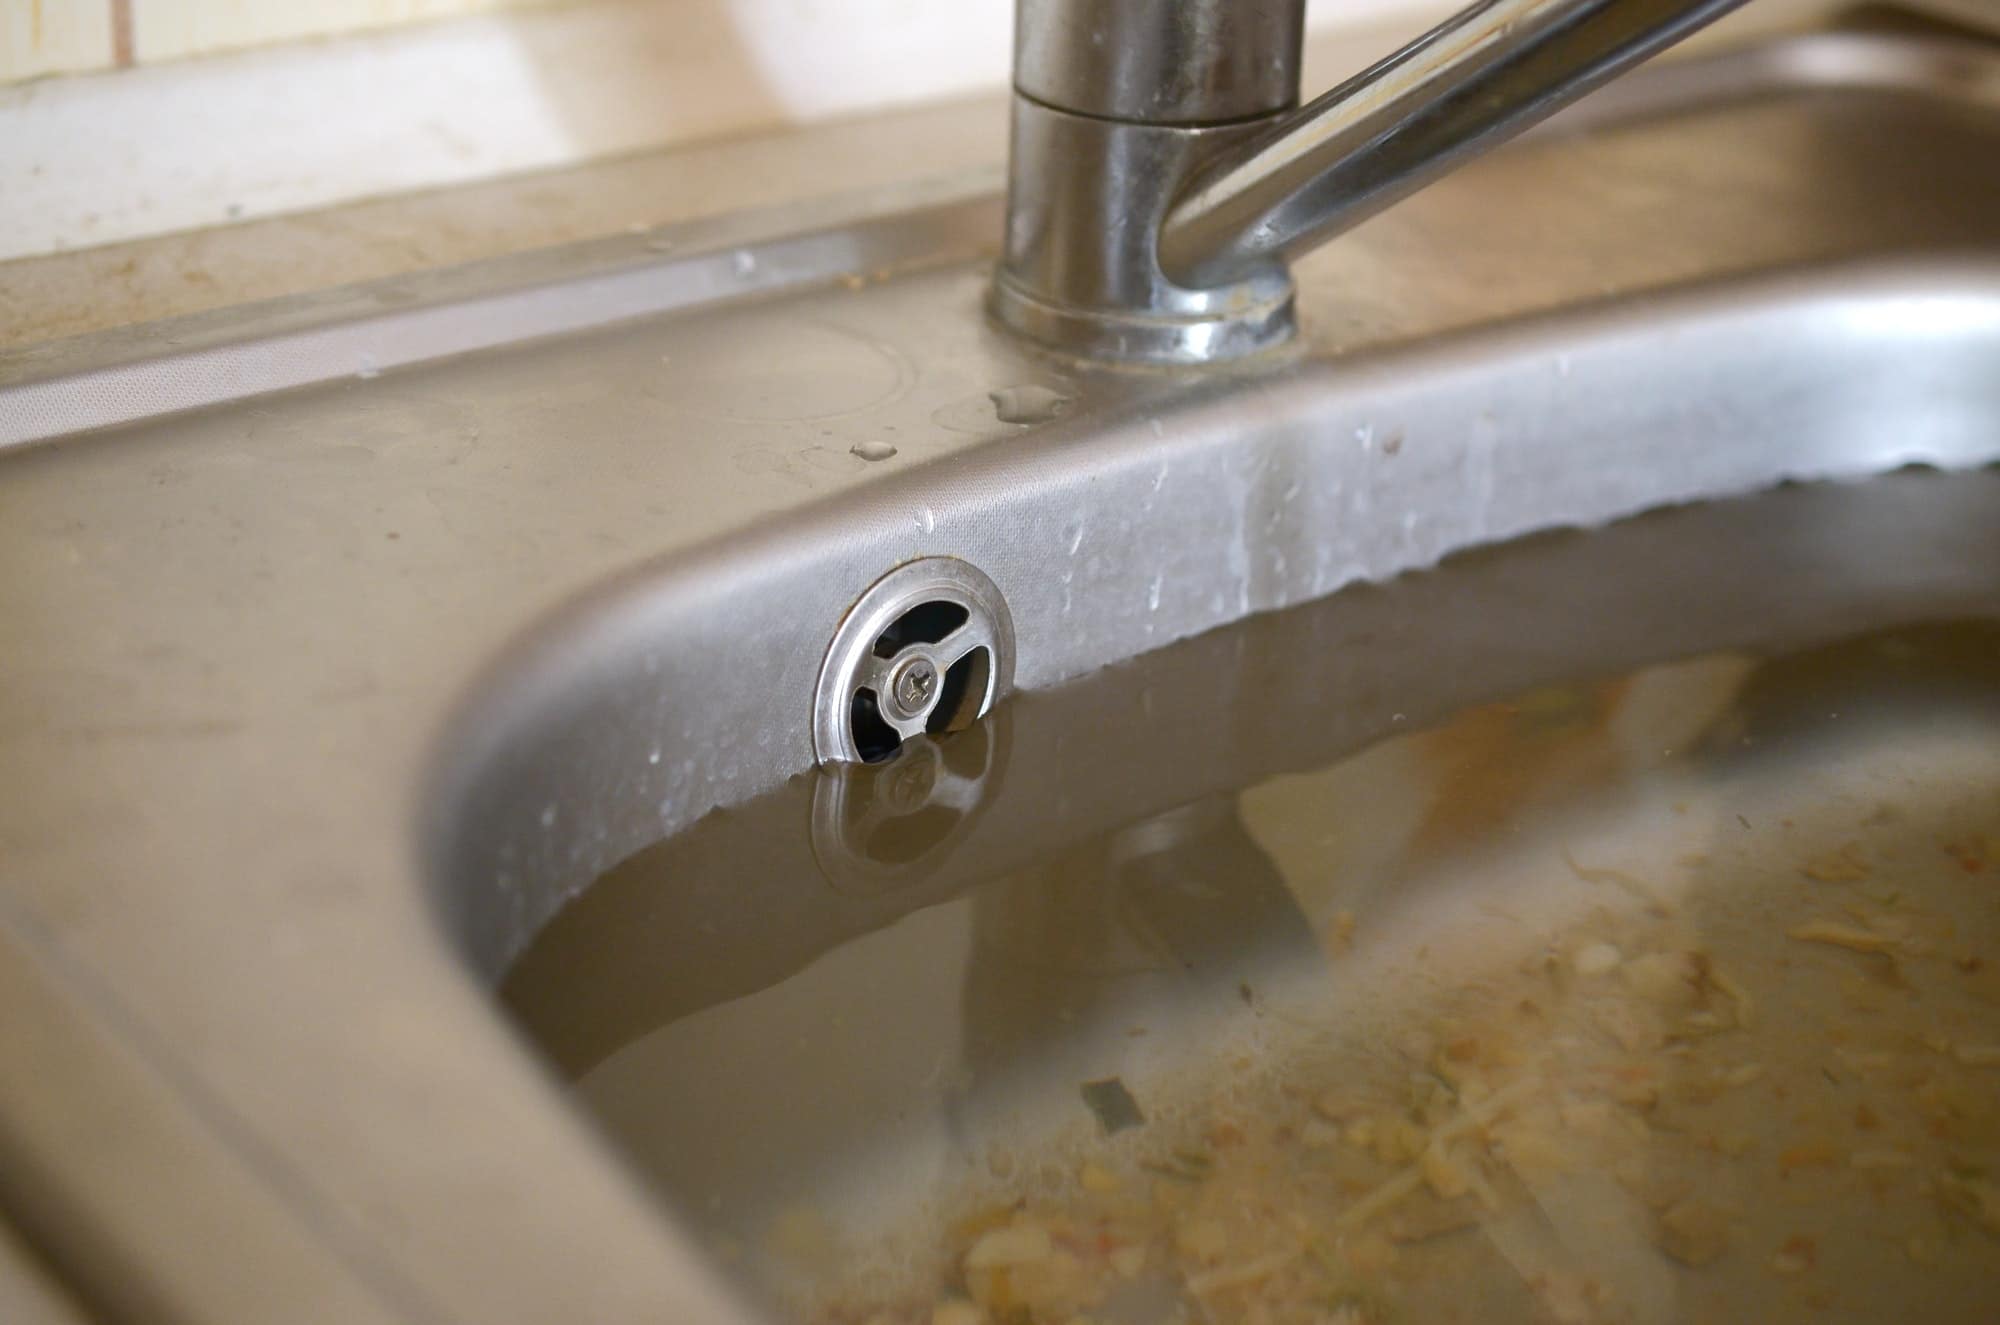 stainless-steel-sink-plug-hole-close-up-full-of-water-and-particles-of-food